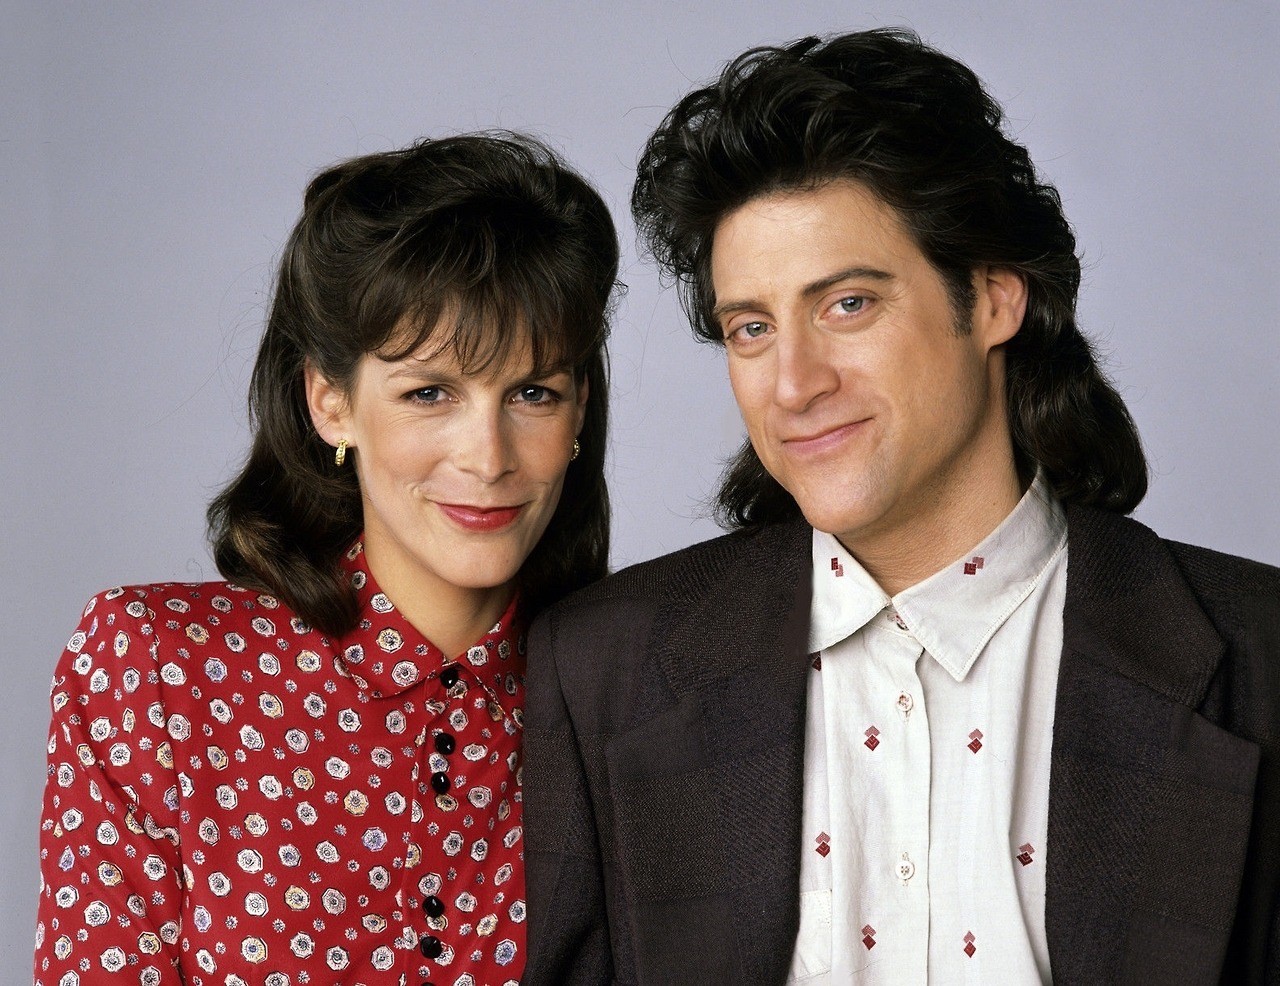 Ruchard Lewis and Jamie Lee Curtis in 1989's Anything but Love